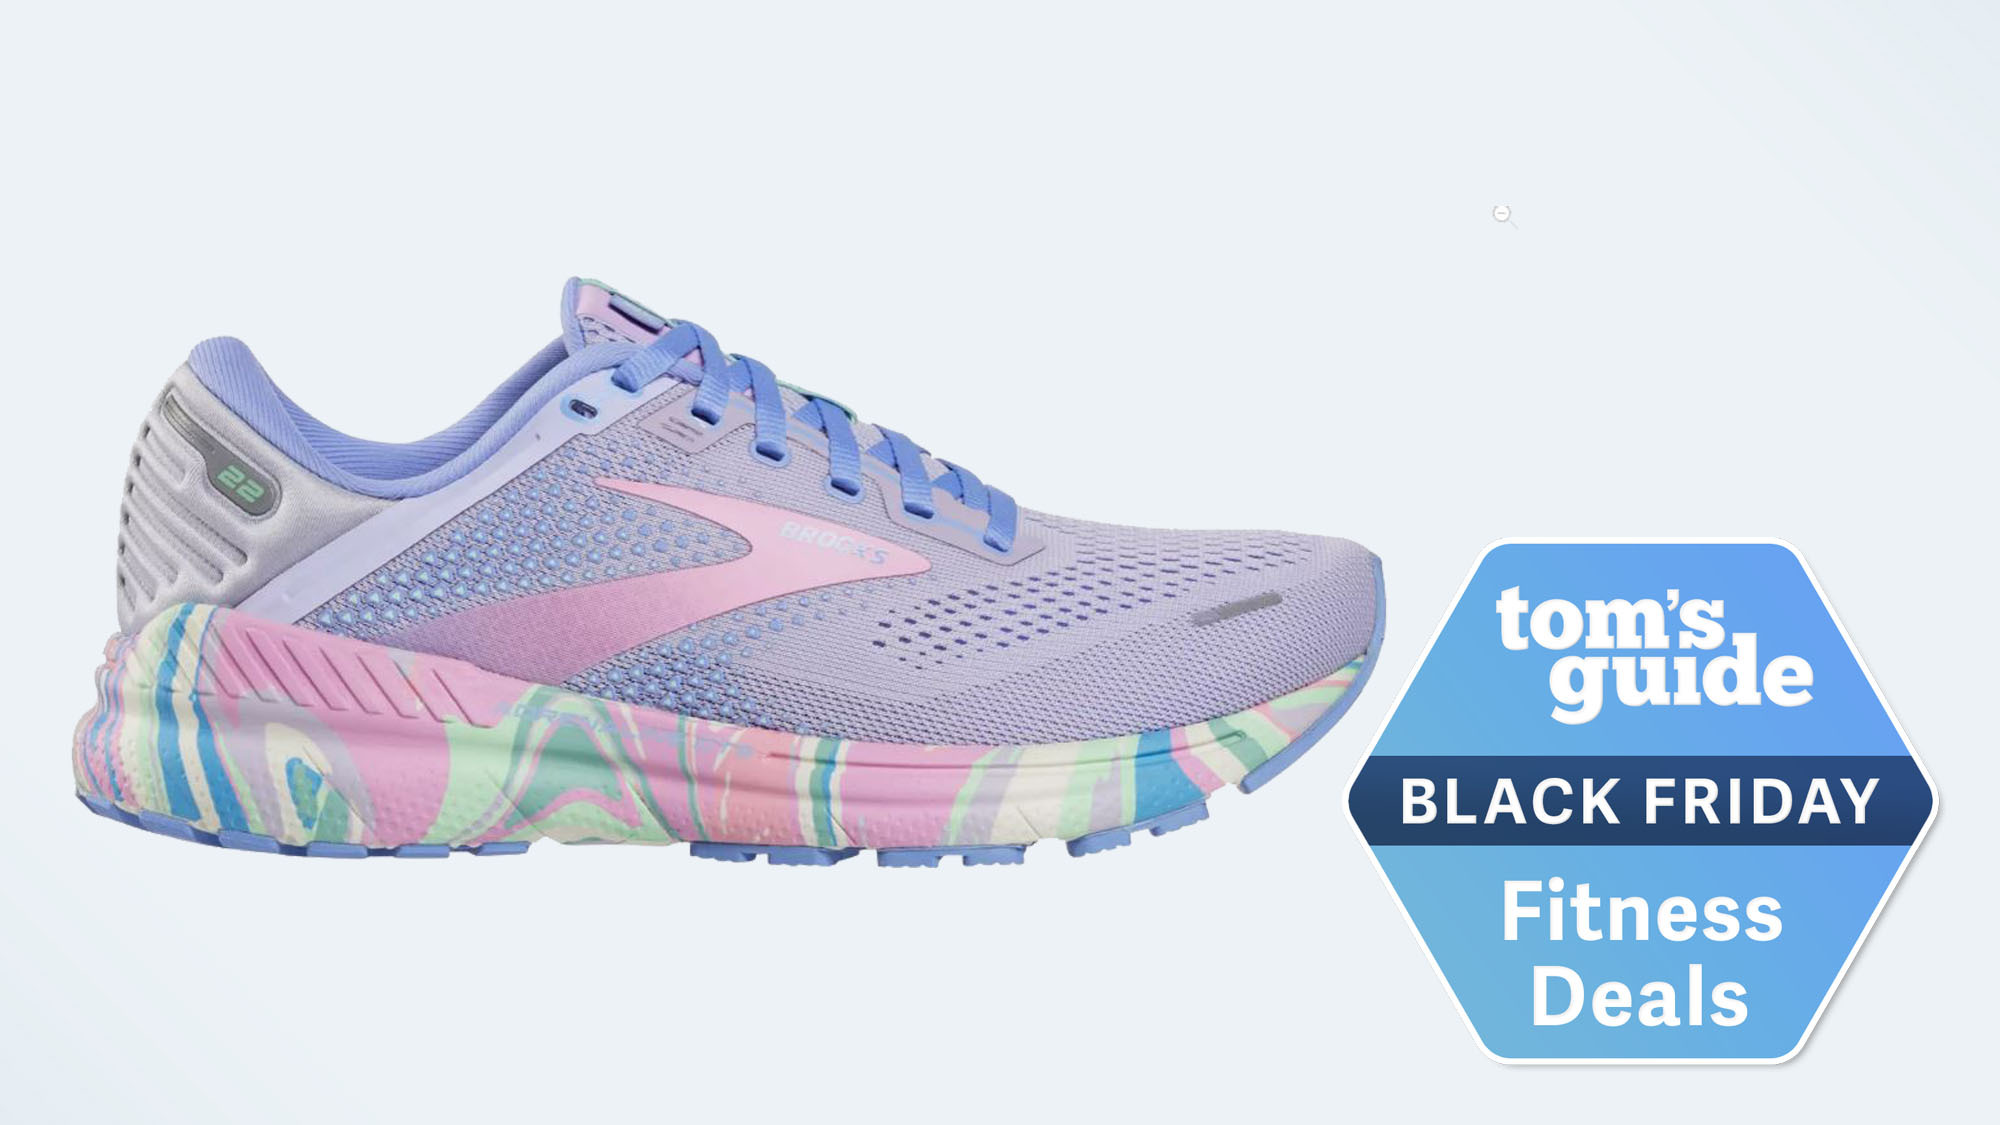 Dick's Sporting Goods Black Friday deals — save $50 on the Brooks Adrenaline  running shoe